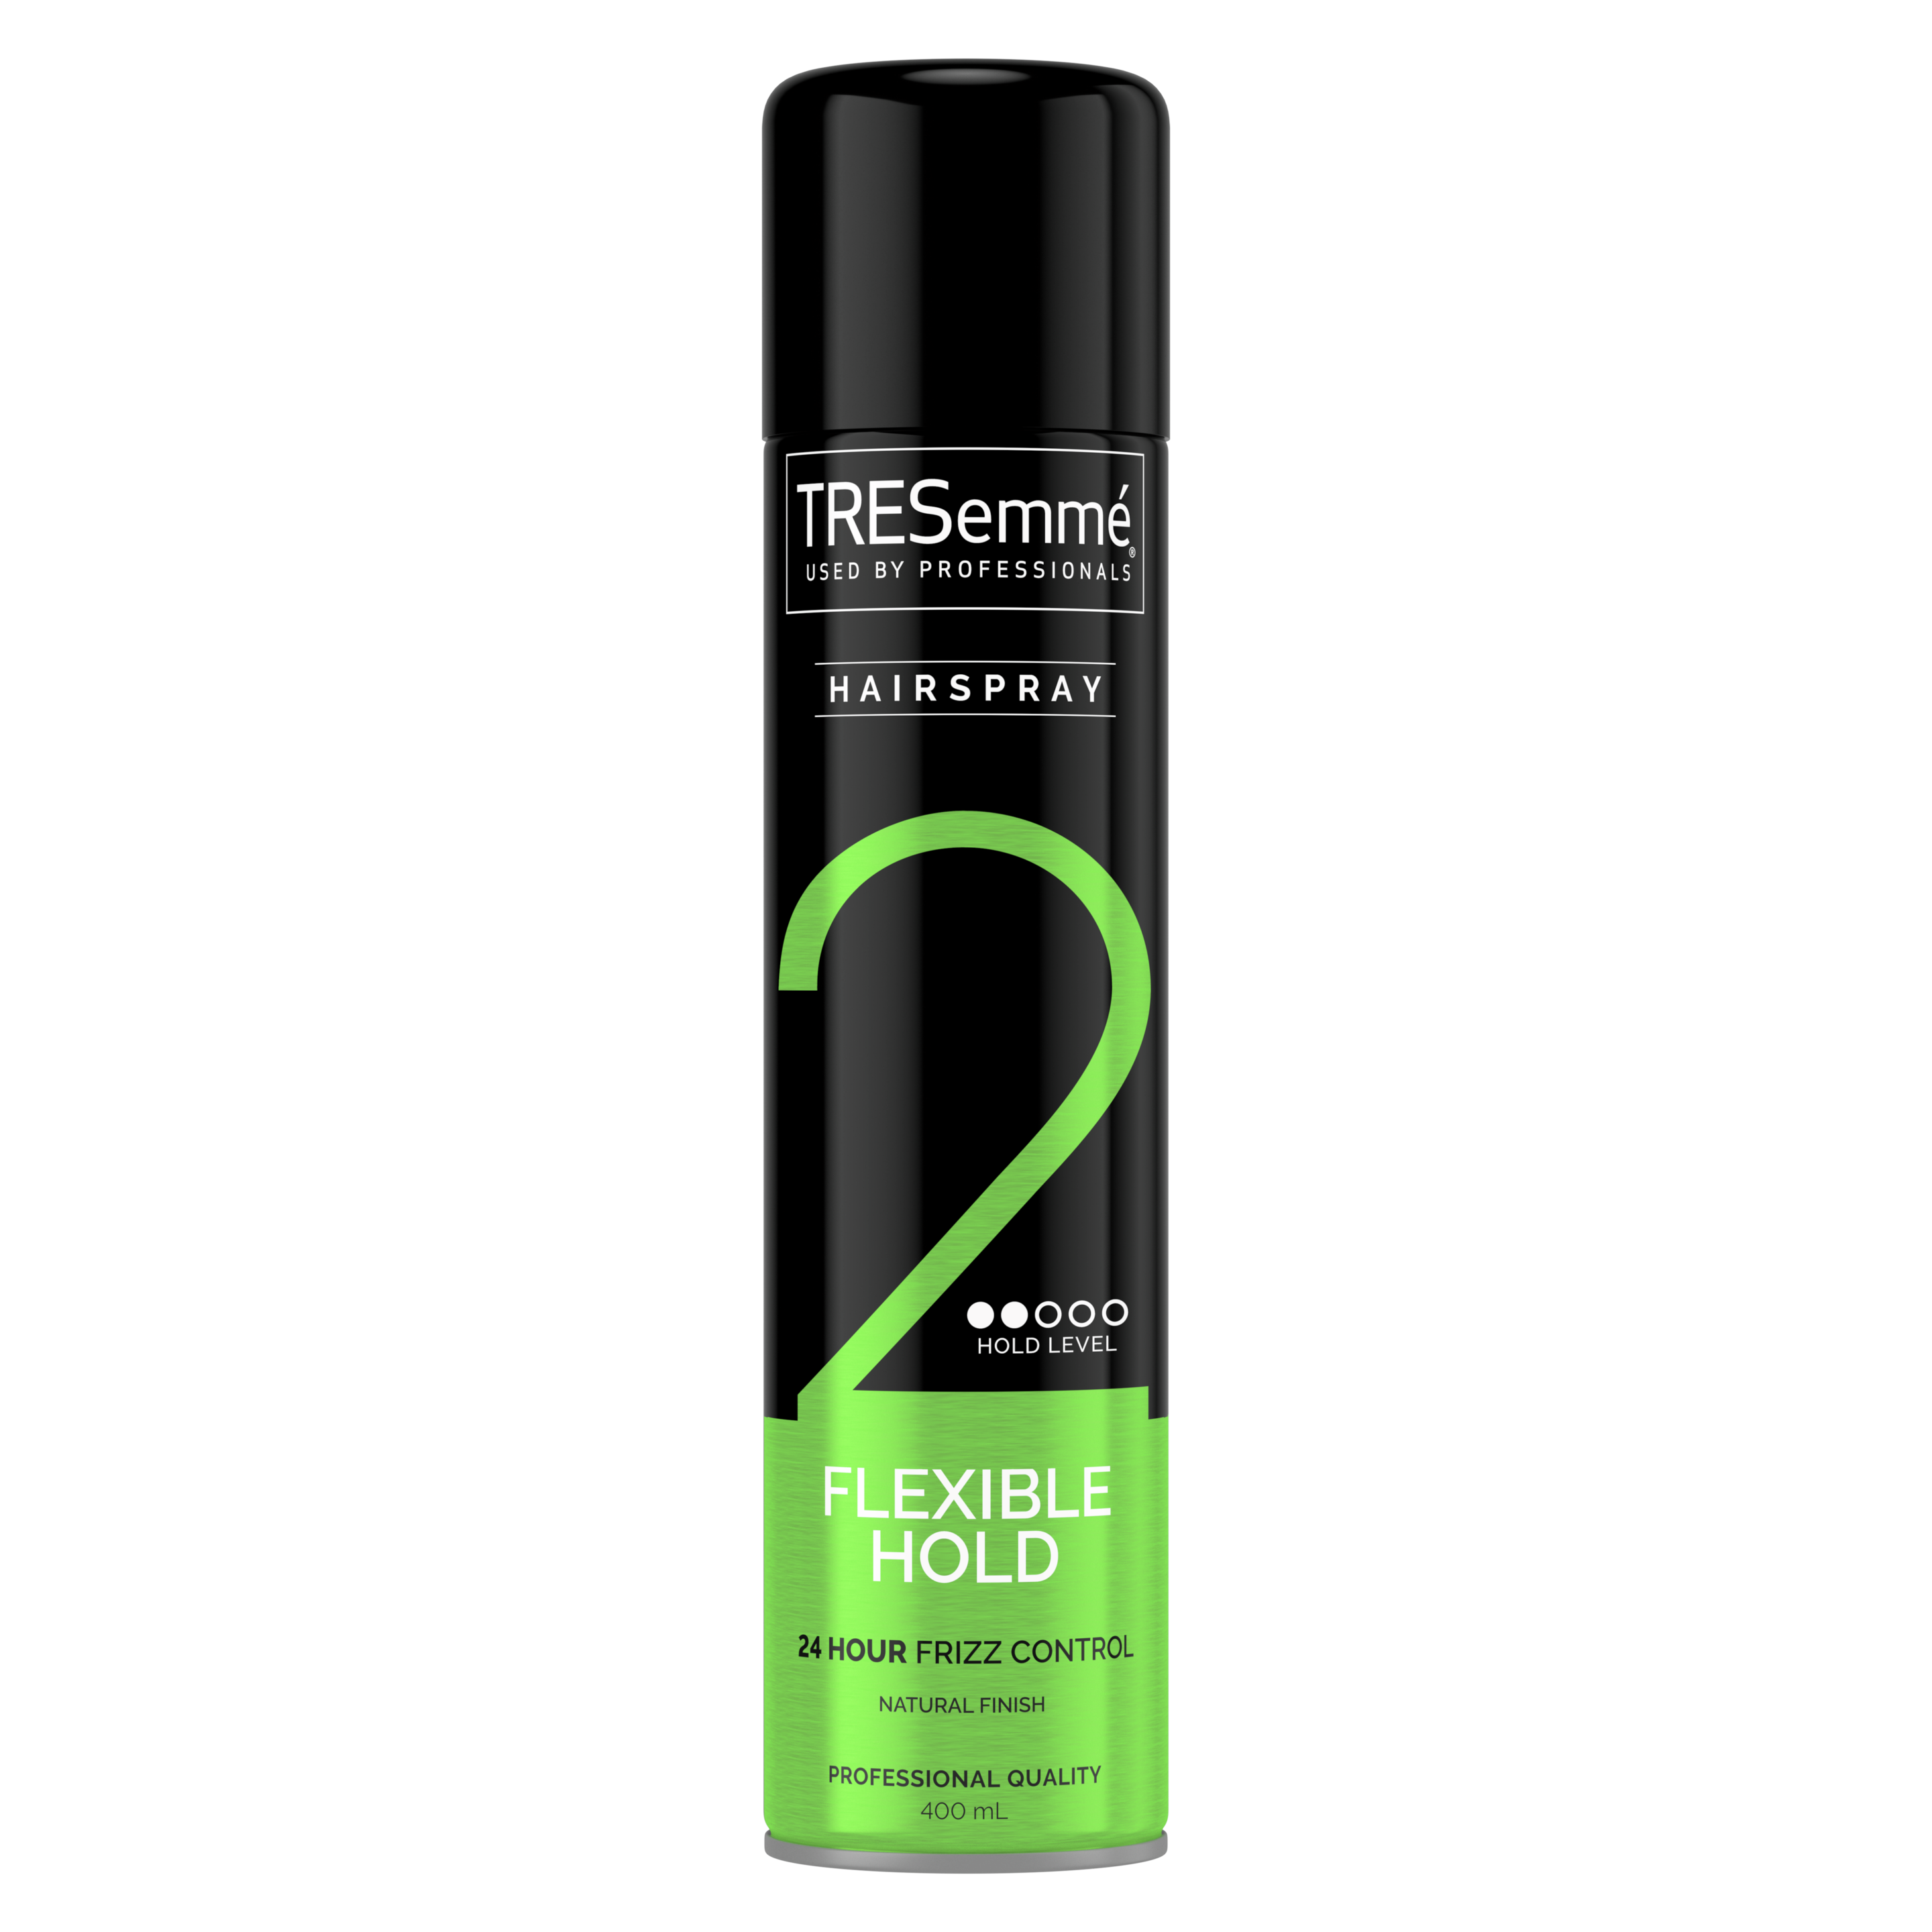 A 400ml can tresemme Flexible hold hairspray